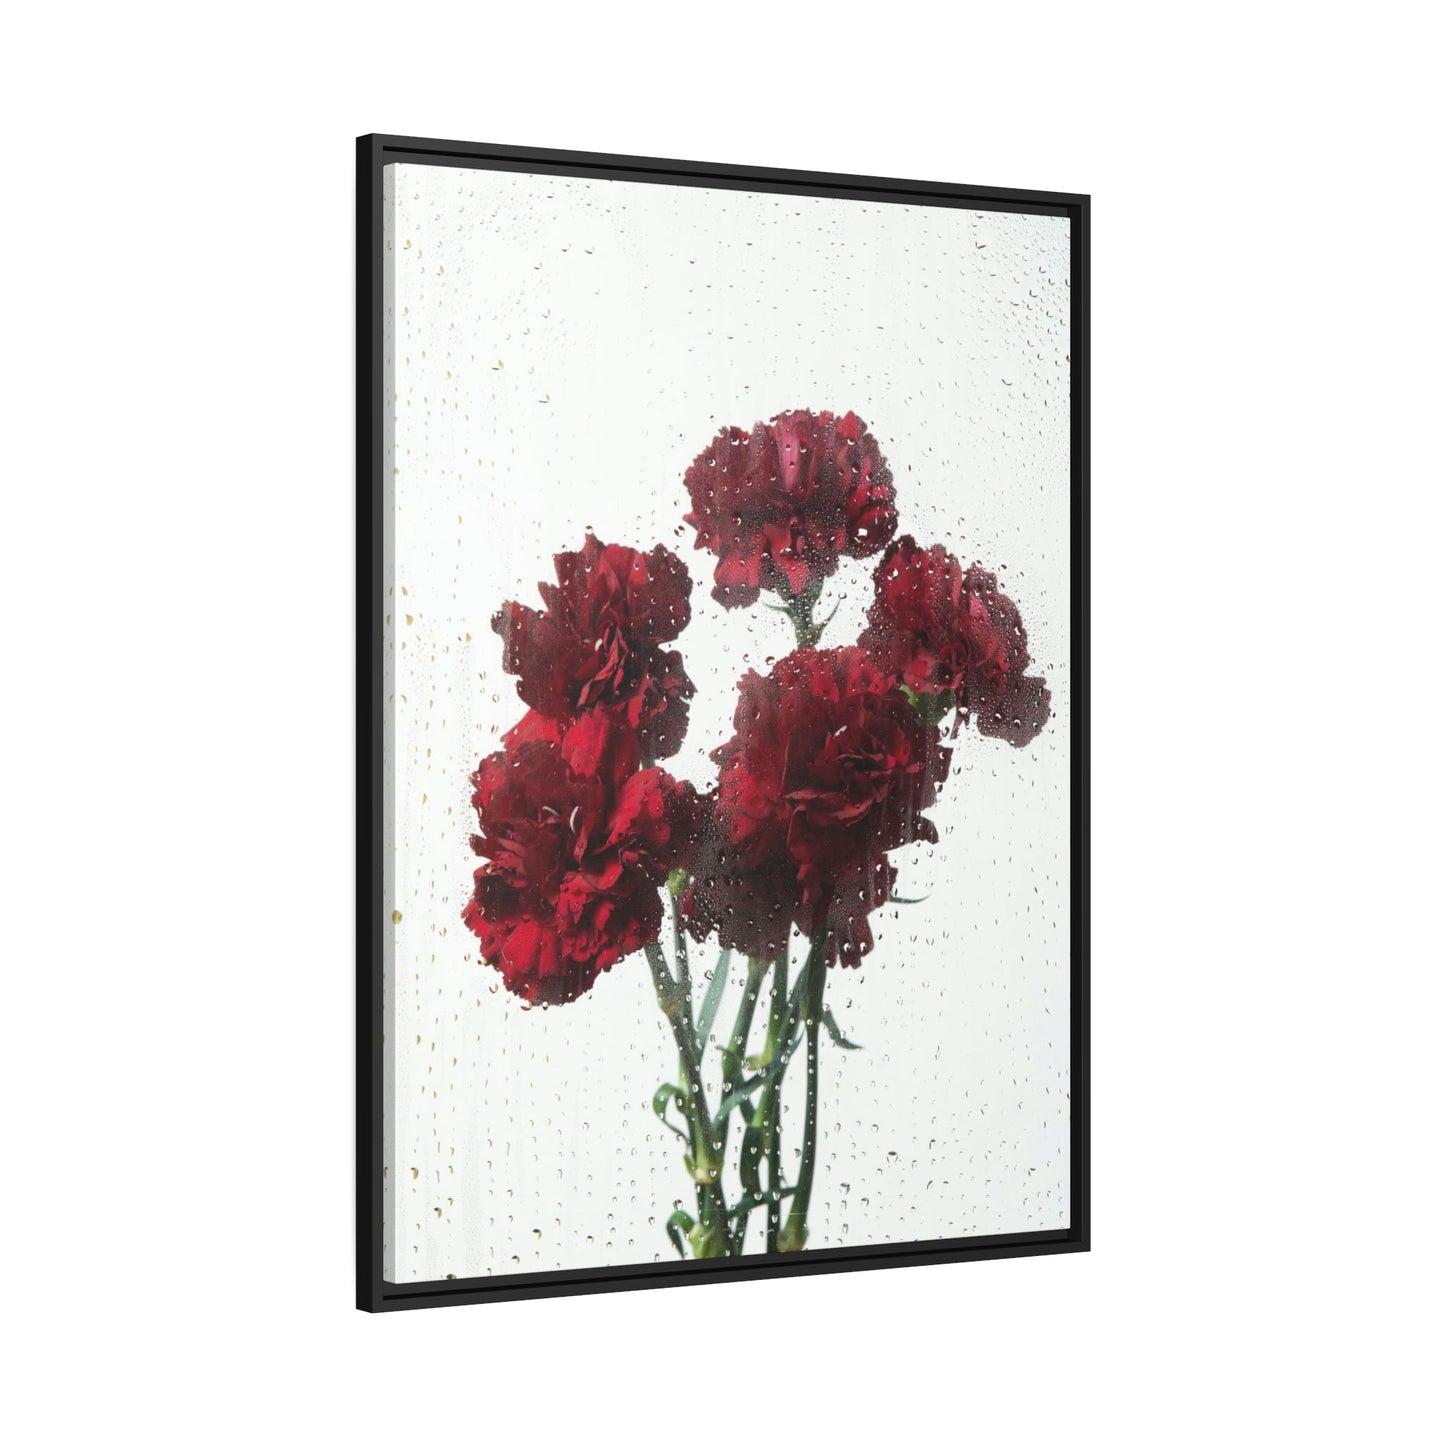 Timeless Charm: Carnations Art on Natural Canvas and Wall Art Prints for Your Home Decor